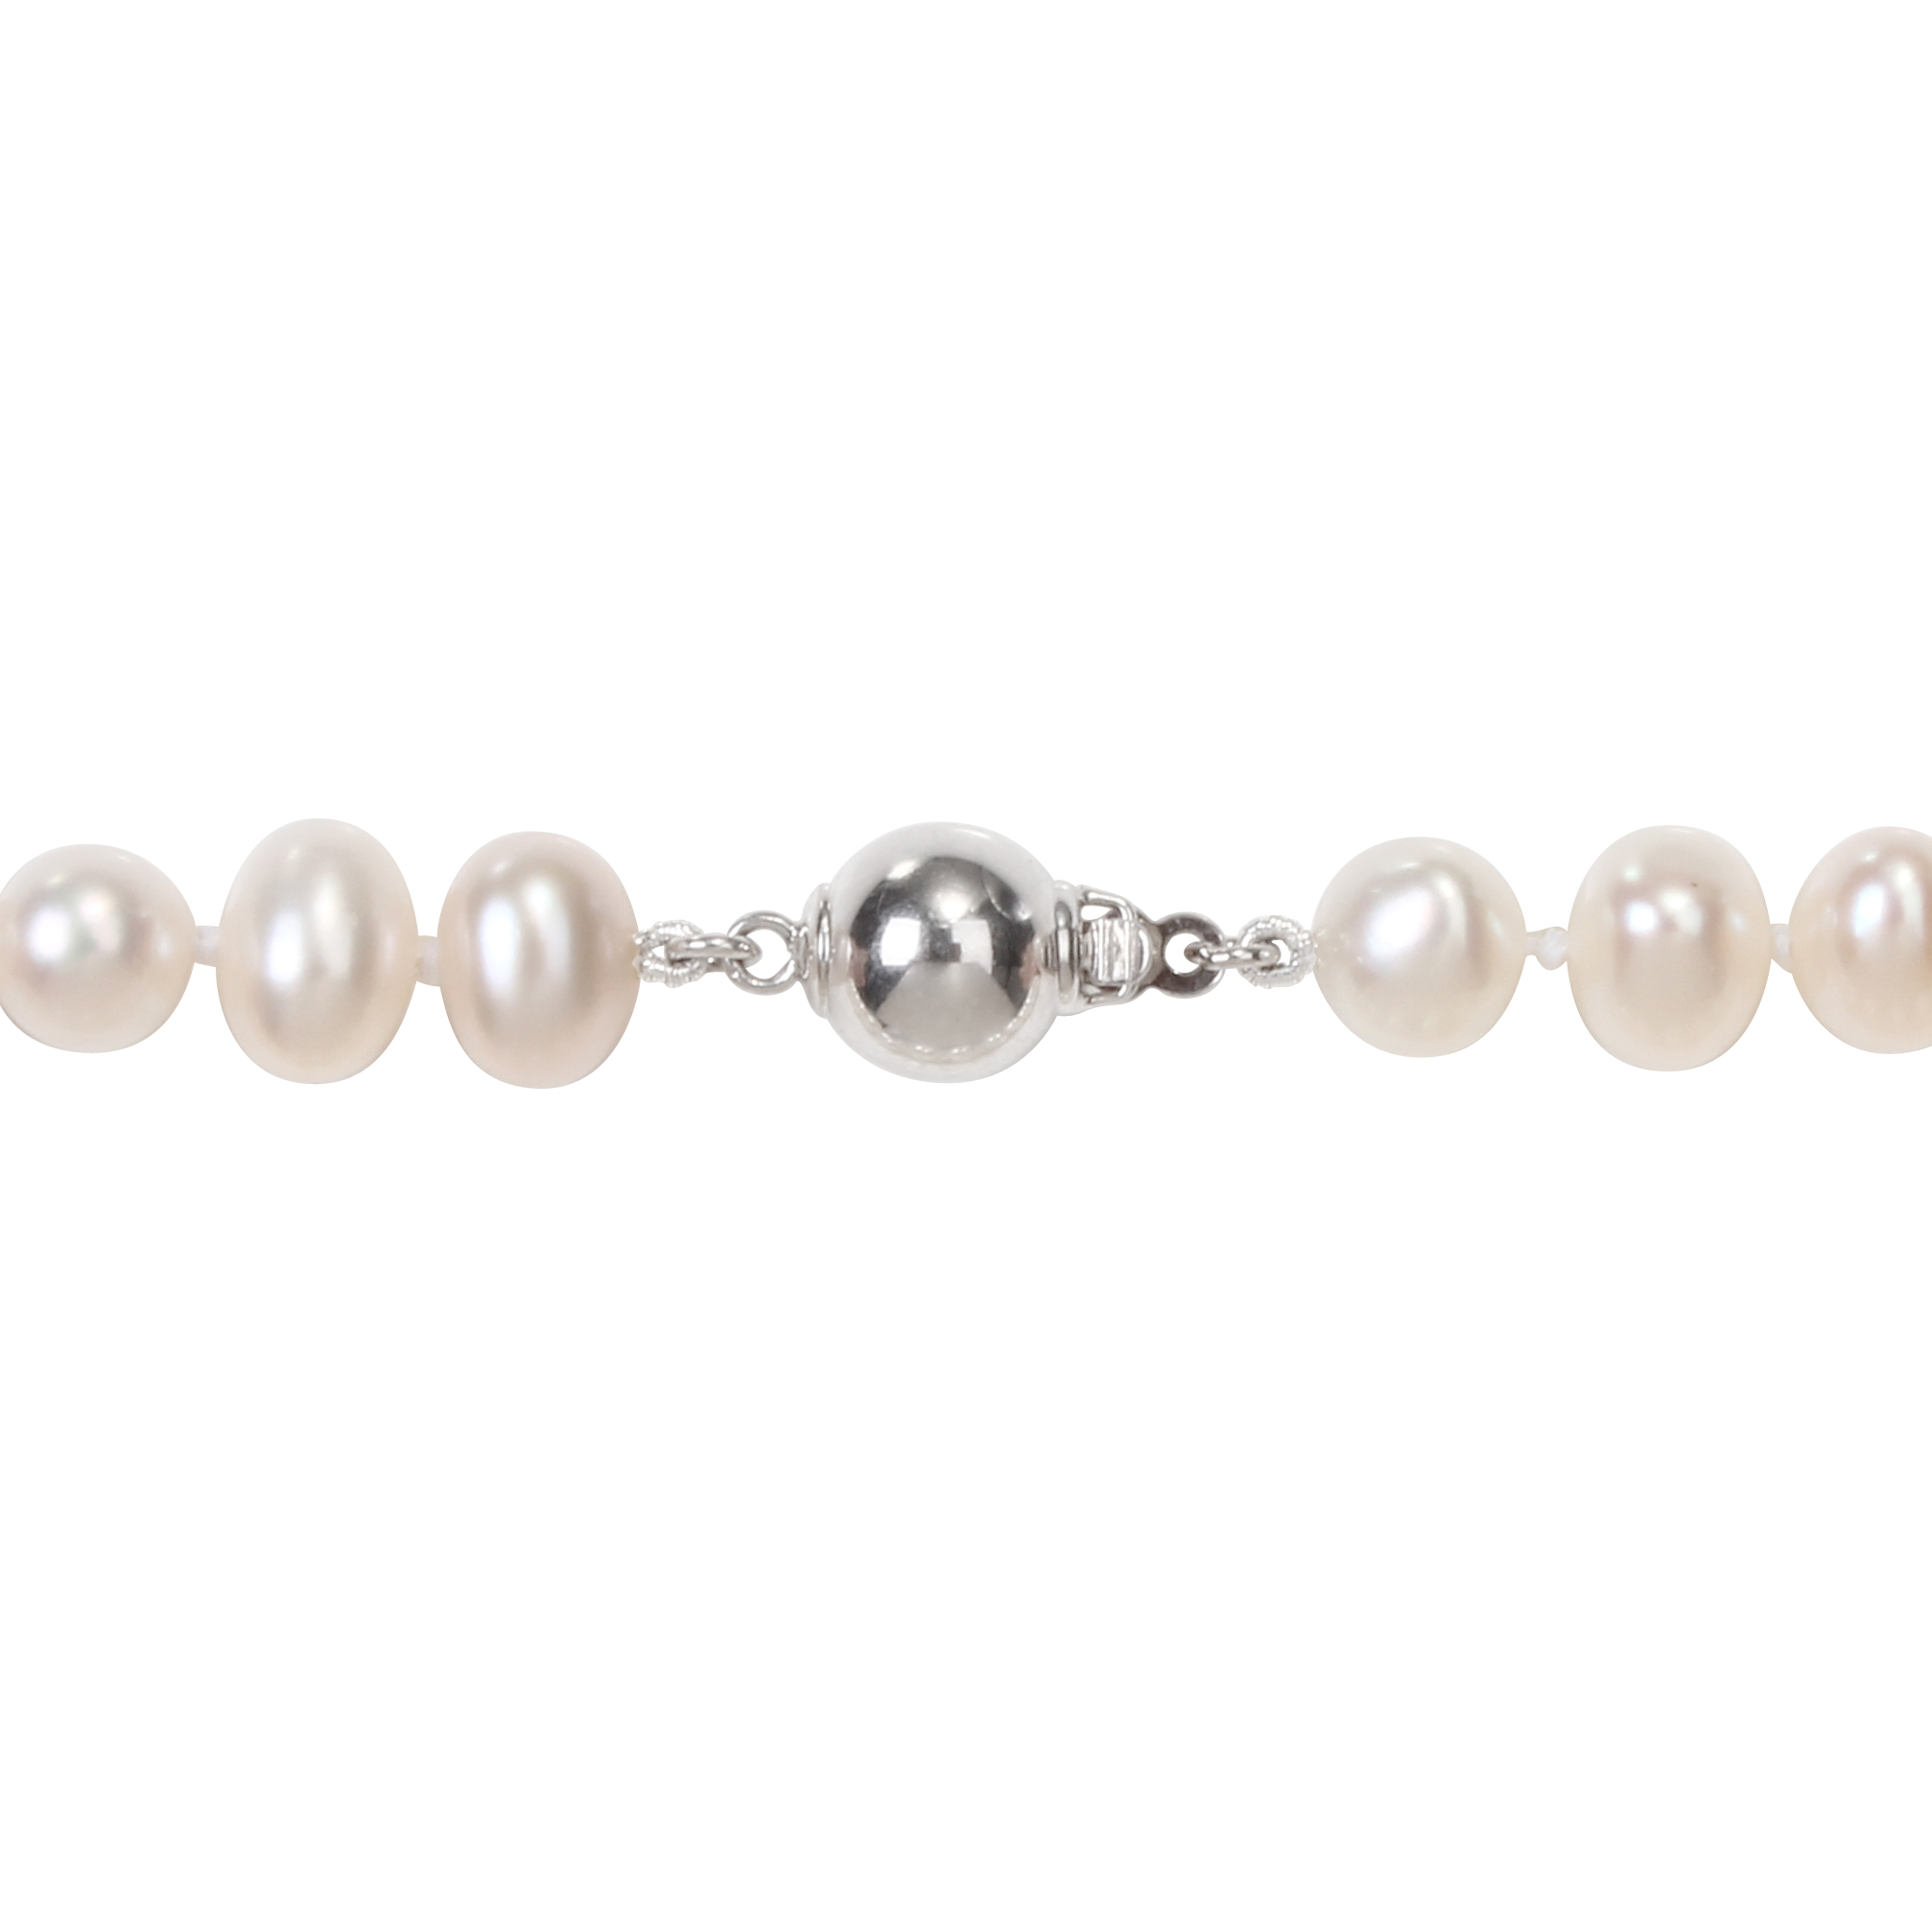 6 - 7 MM Cultured Freshwater Pearl Strand with Sterling Silver Ball Clasp - 20 in